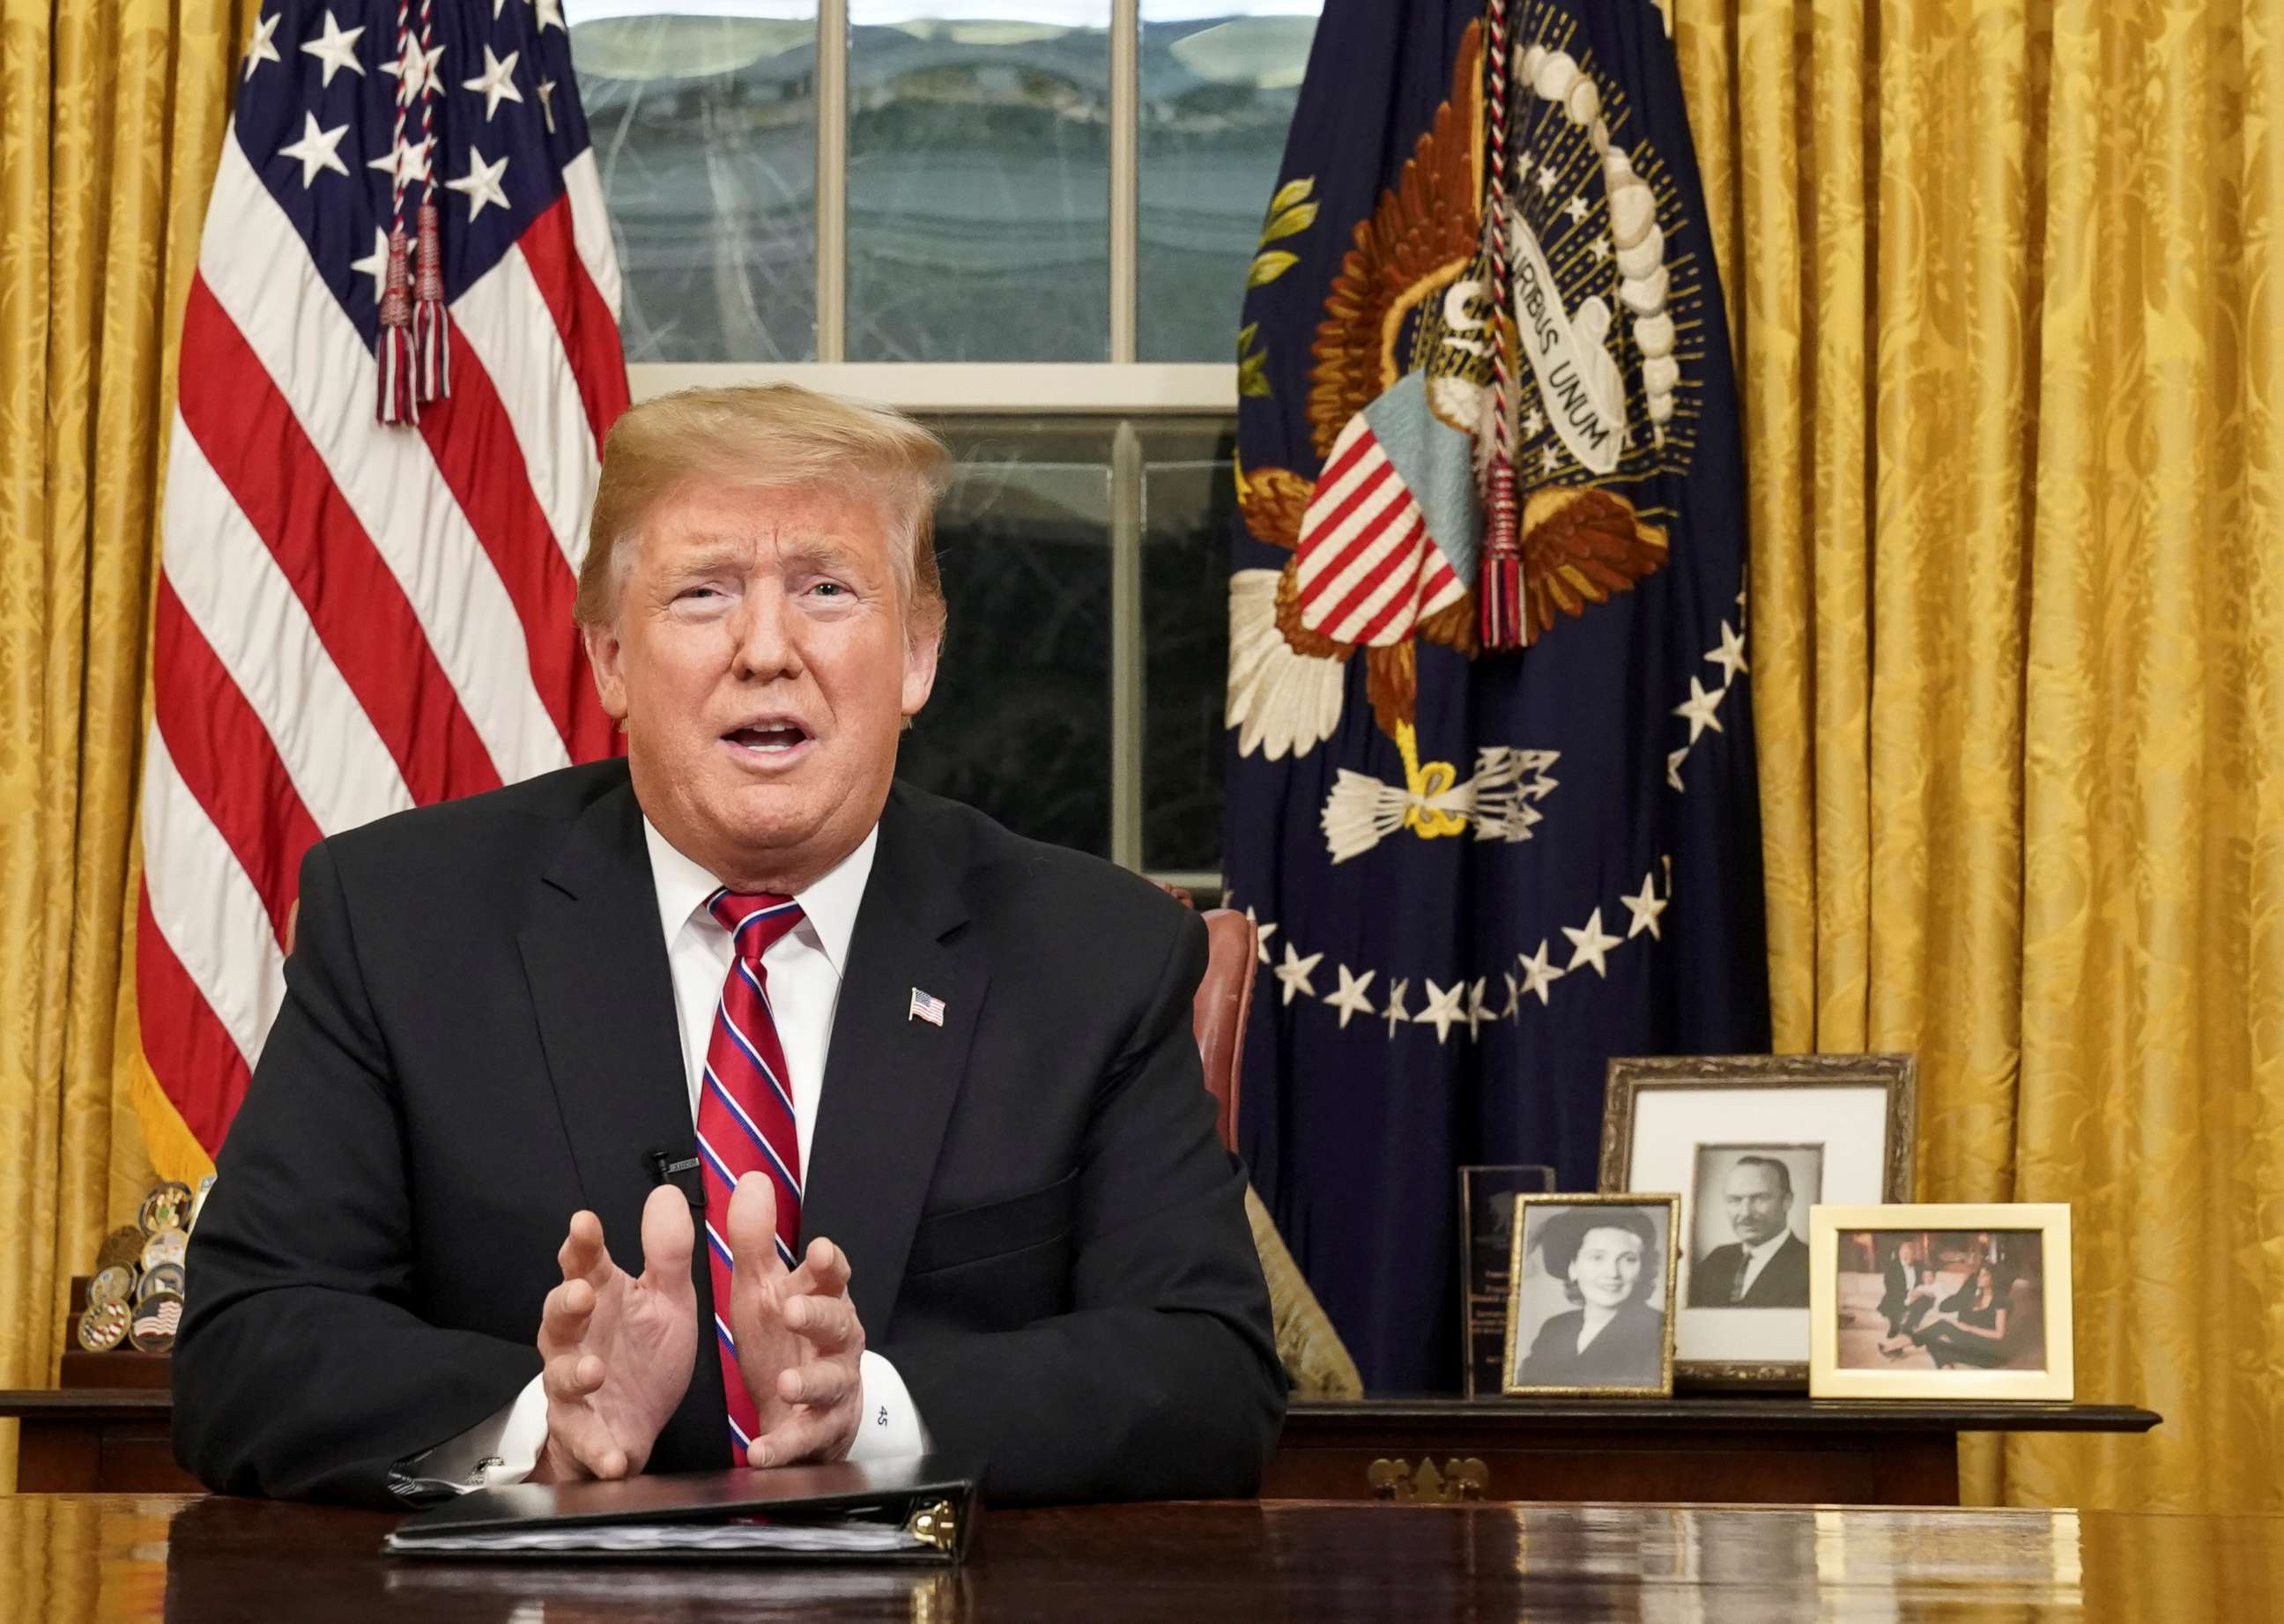 PHOTO: President Donald Trump deliversÂ a televised address to the nation from his desk in the Oval Office at the White House in Washington, Jan. 8, 2019.